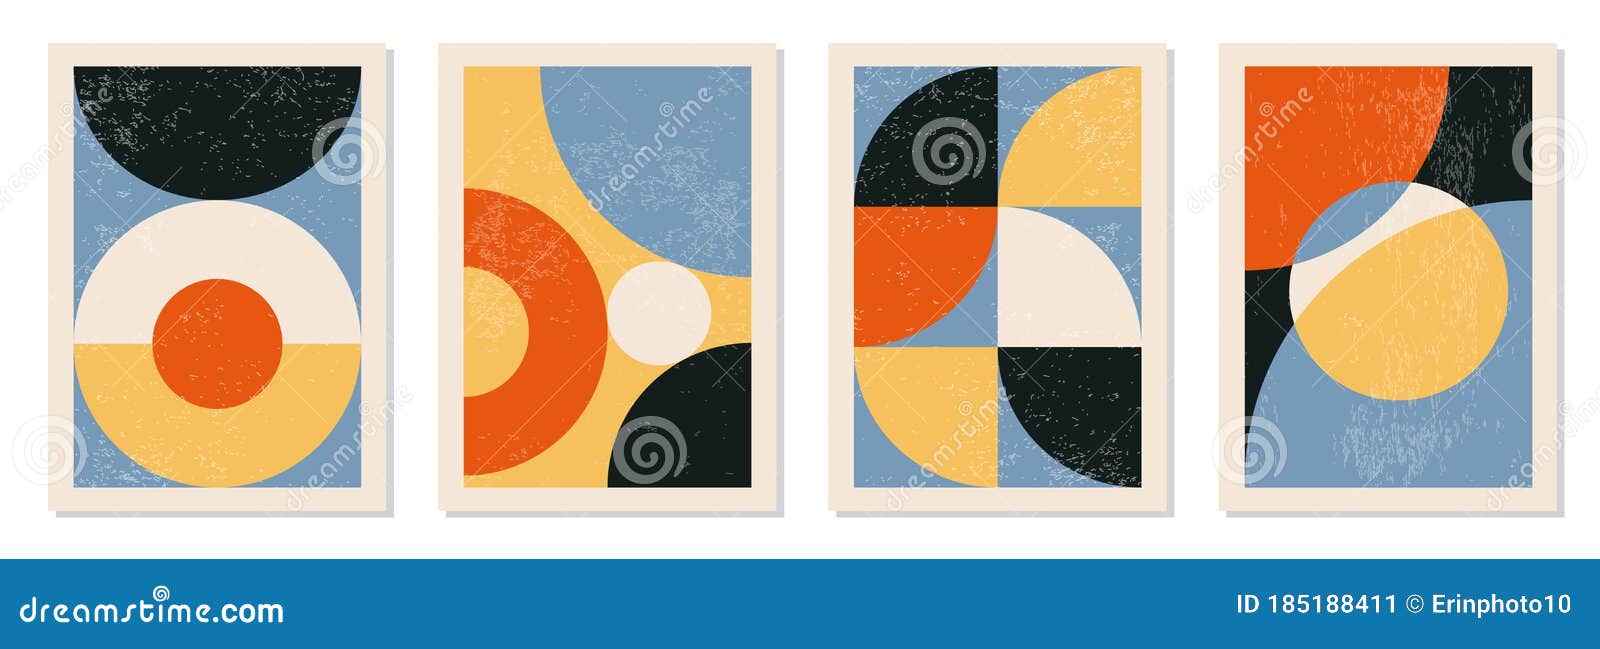 set of minimal 20s geometric  posters,  template with primitive s s